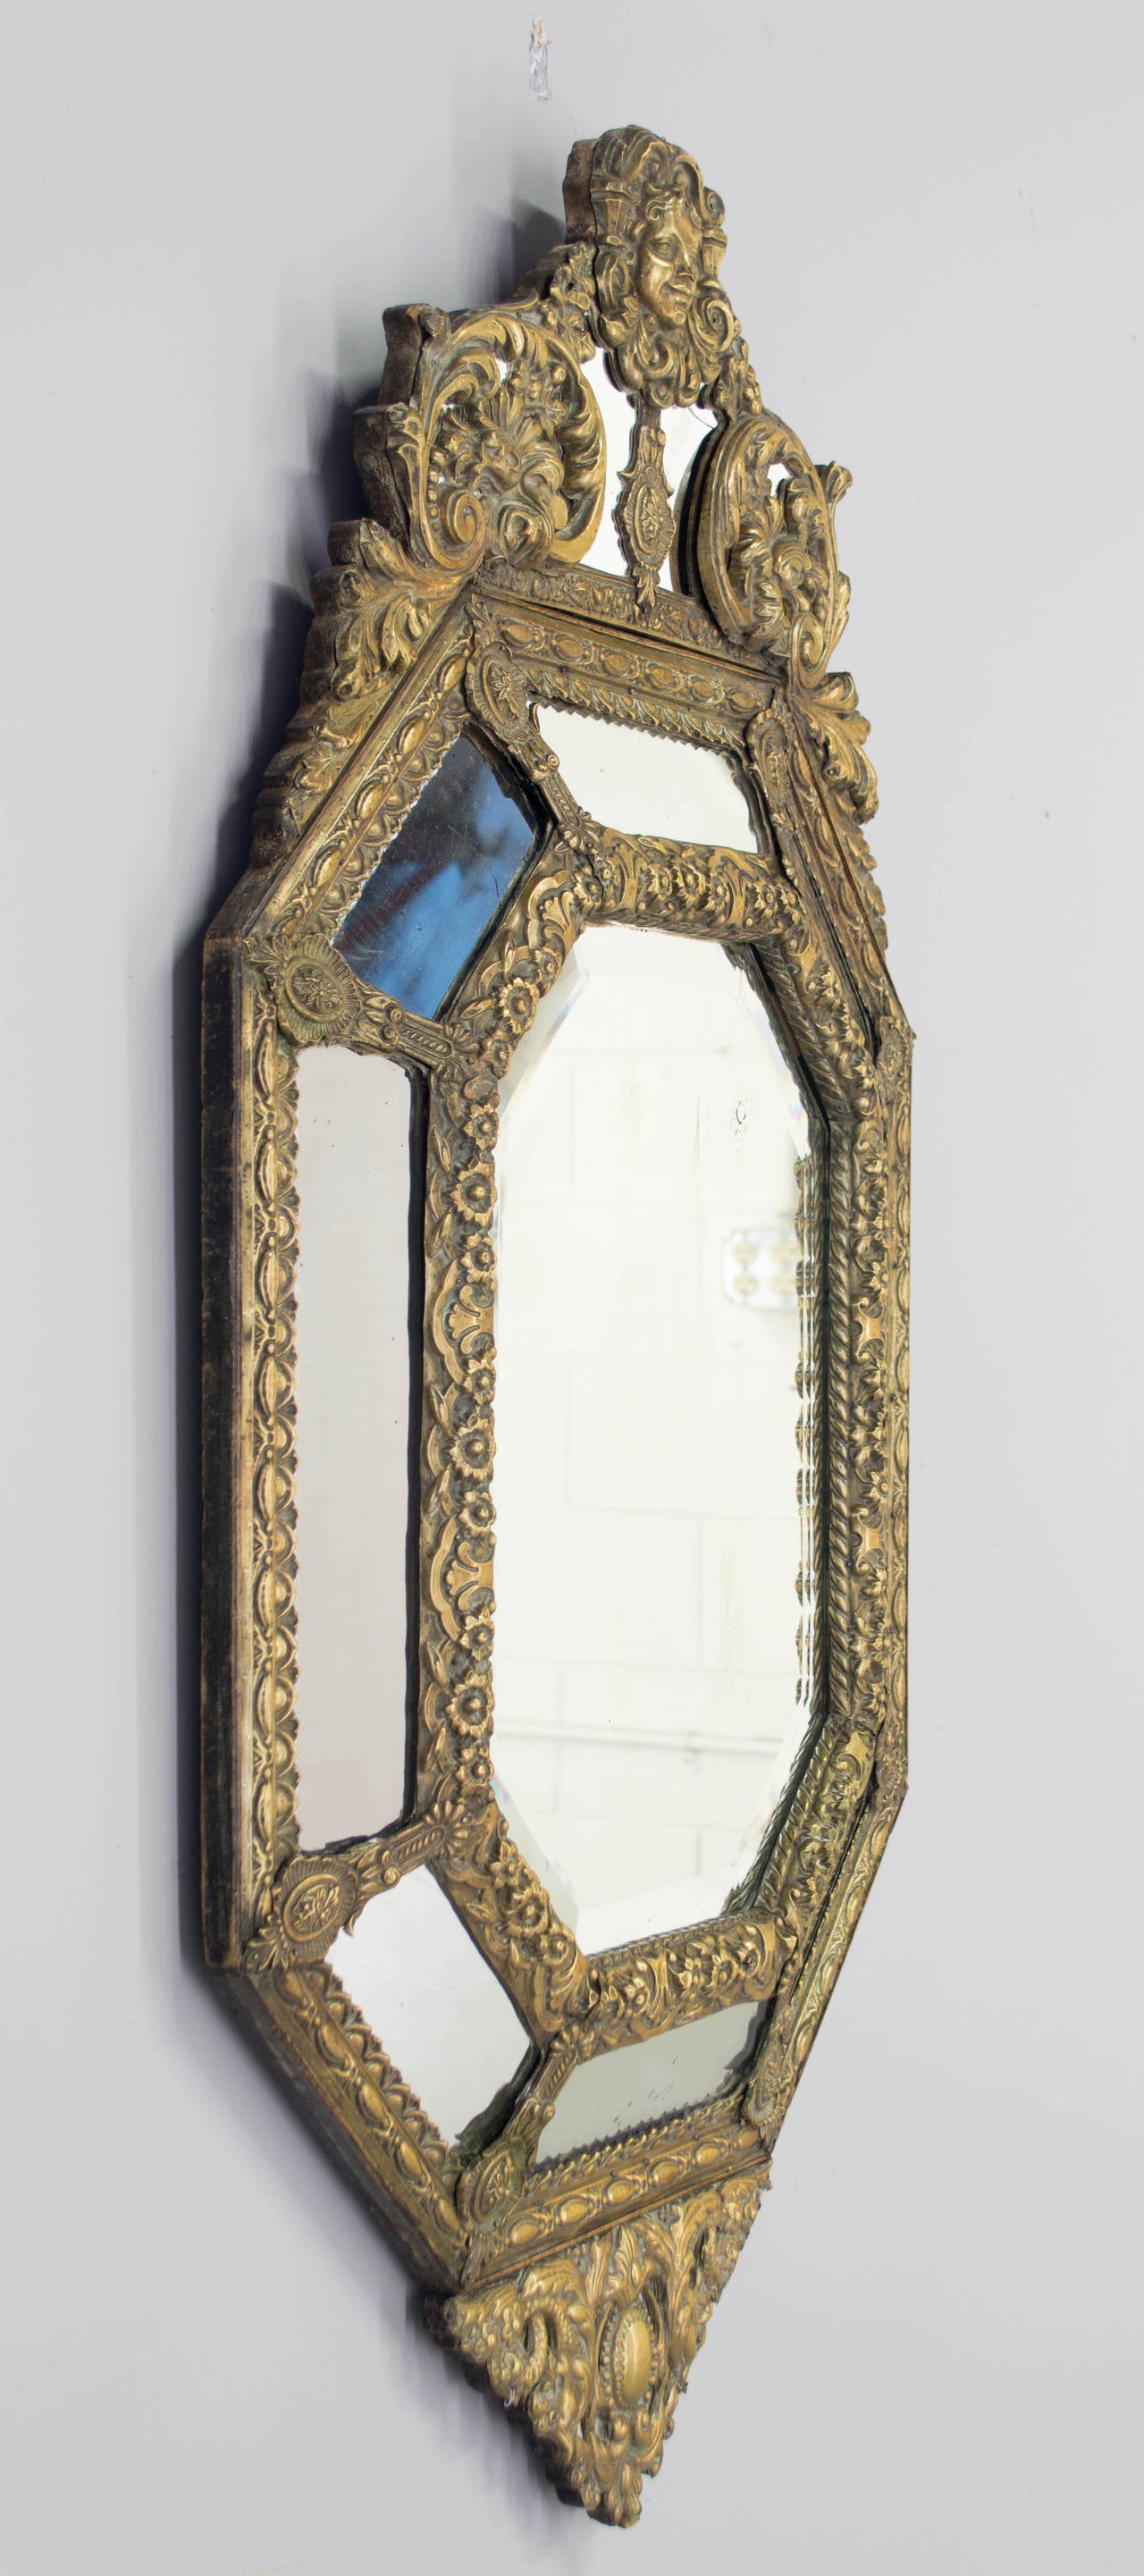 19th century French Renaissance style mirror with intricately embossed brass frame. Elongated octagonal shape with triangular pediment. Center mirror has 1-1/2" bevel.
Condition : Good overall with two minor break on the top. See Picture # 5 &